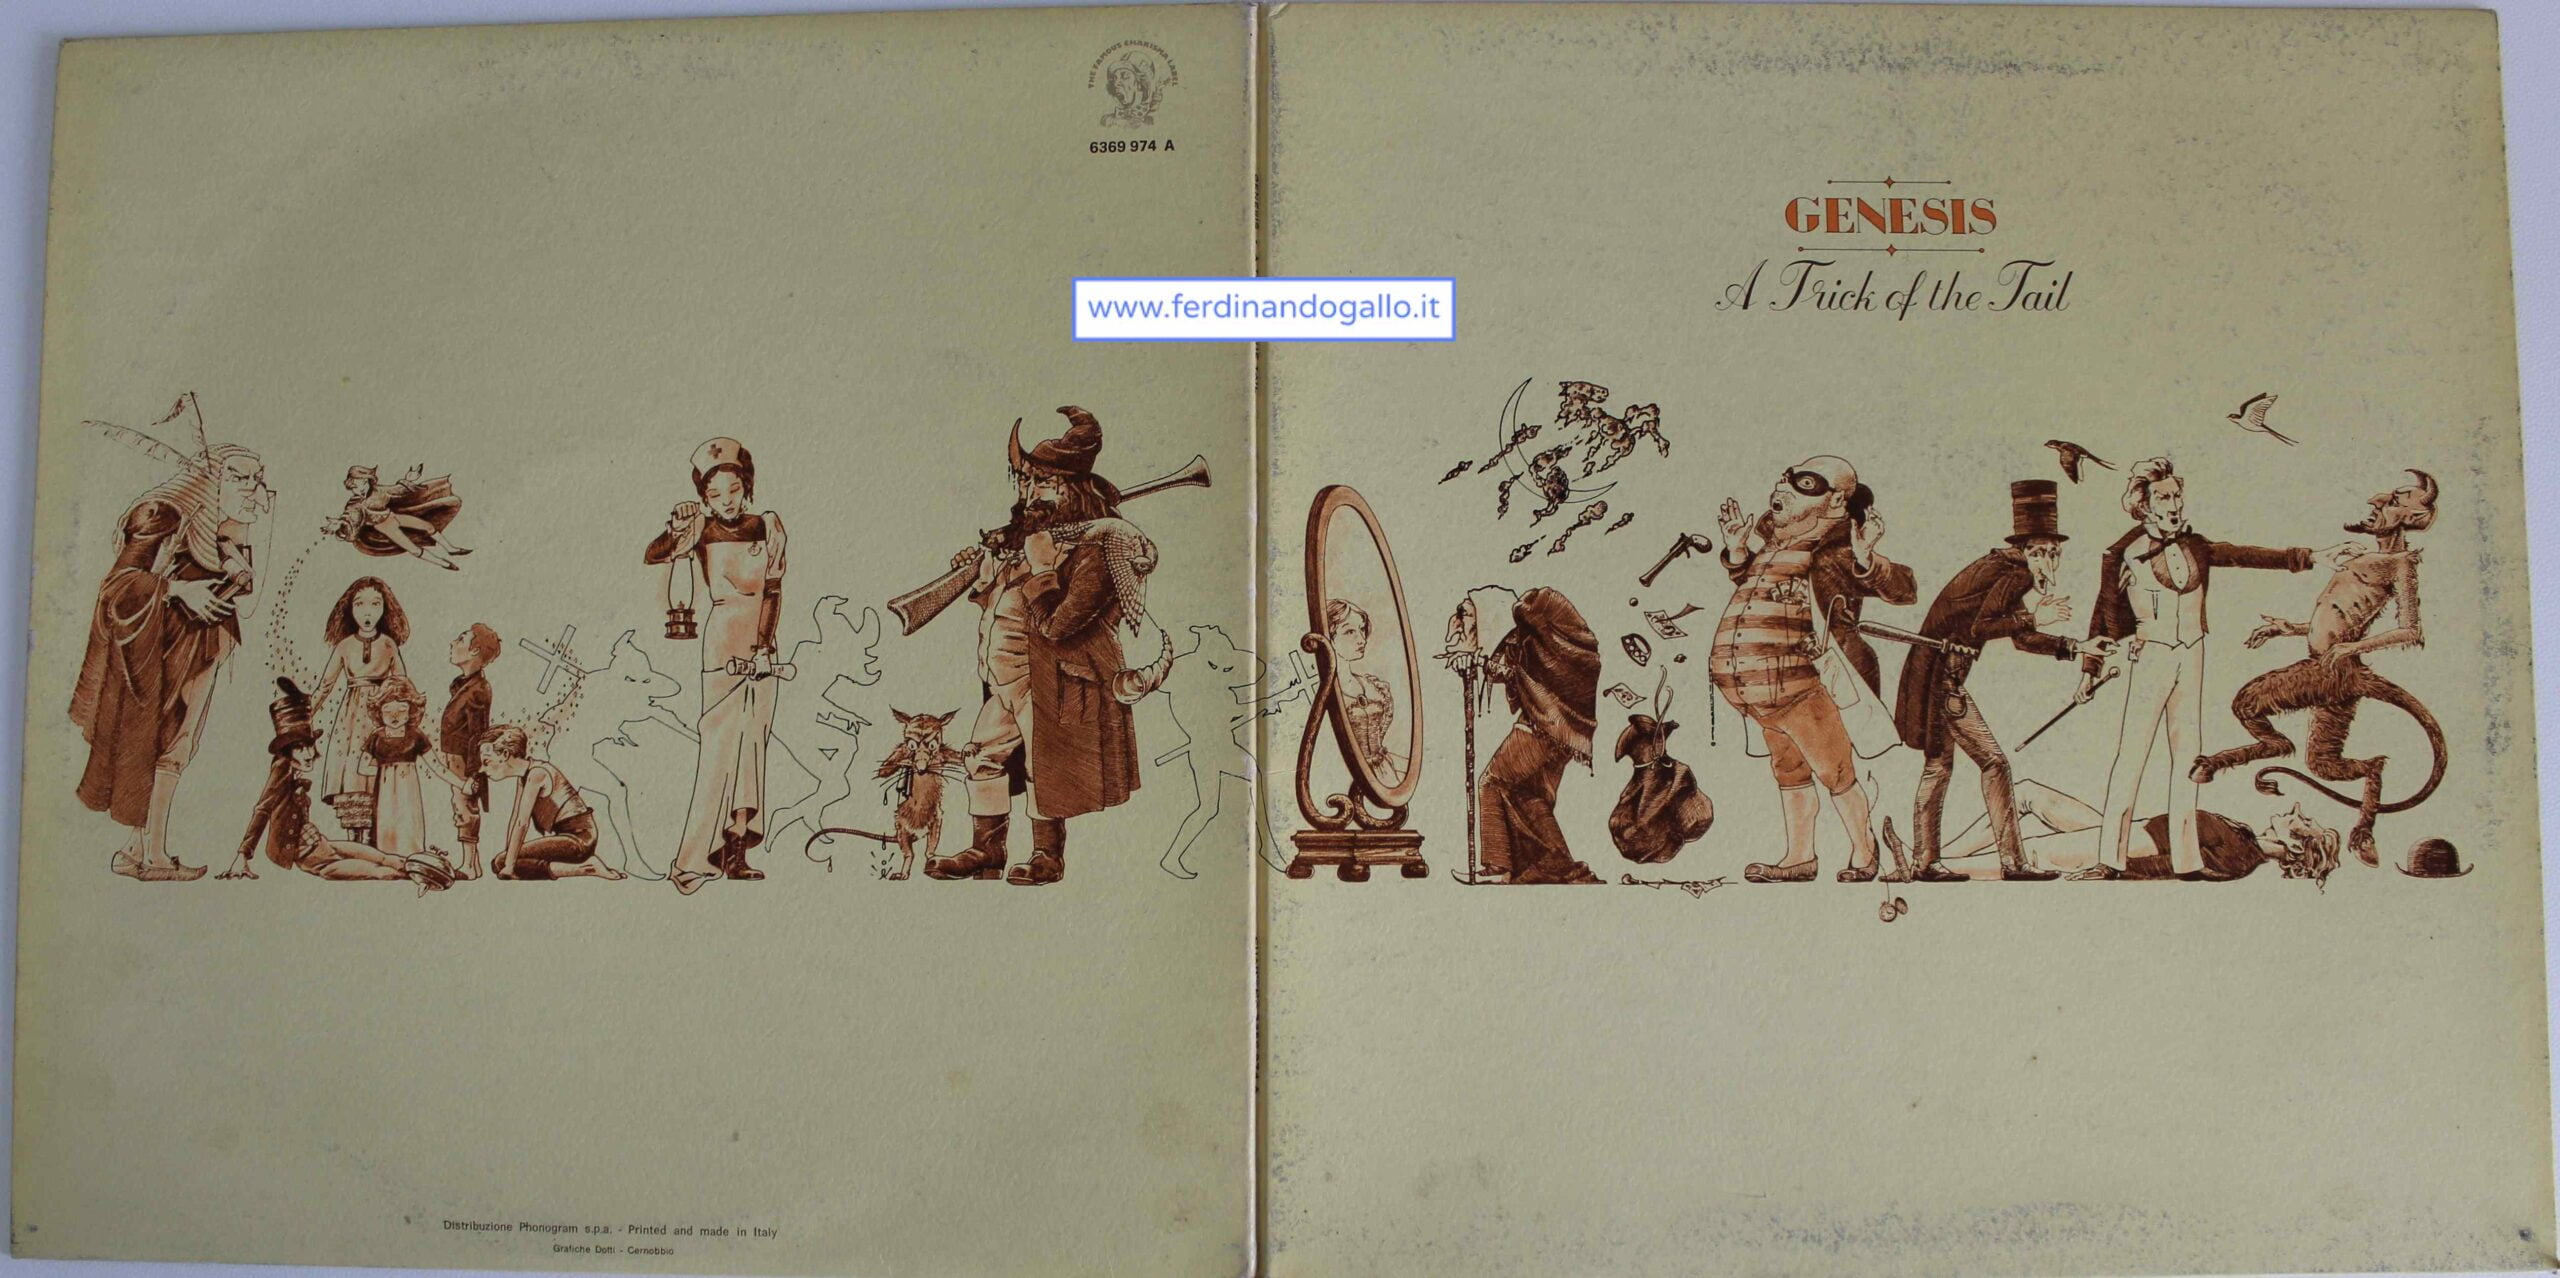 Genesis-A Trick of the Tail-Recensione 2023